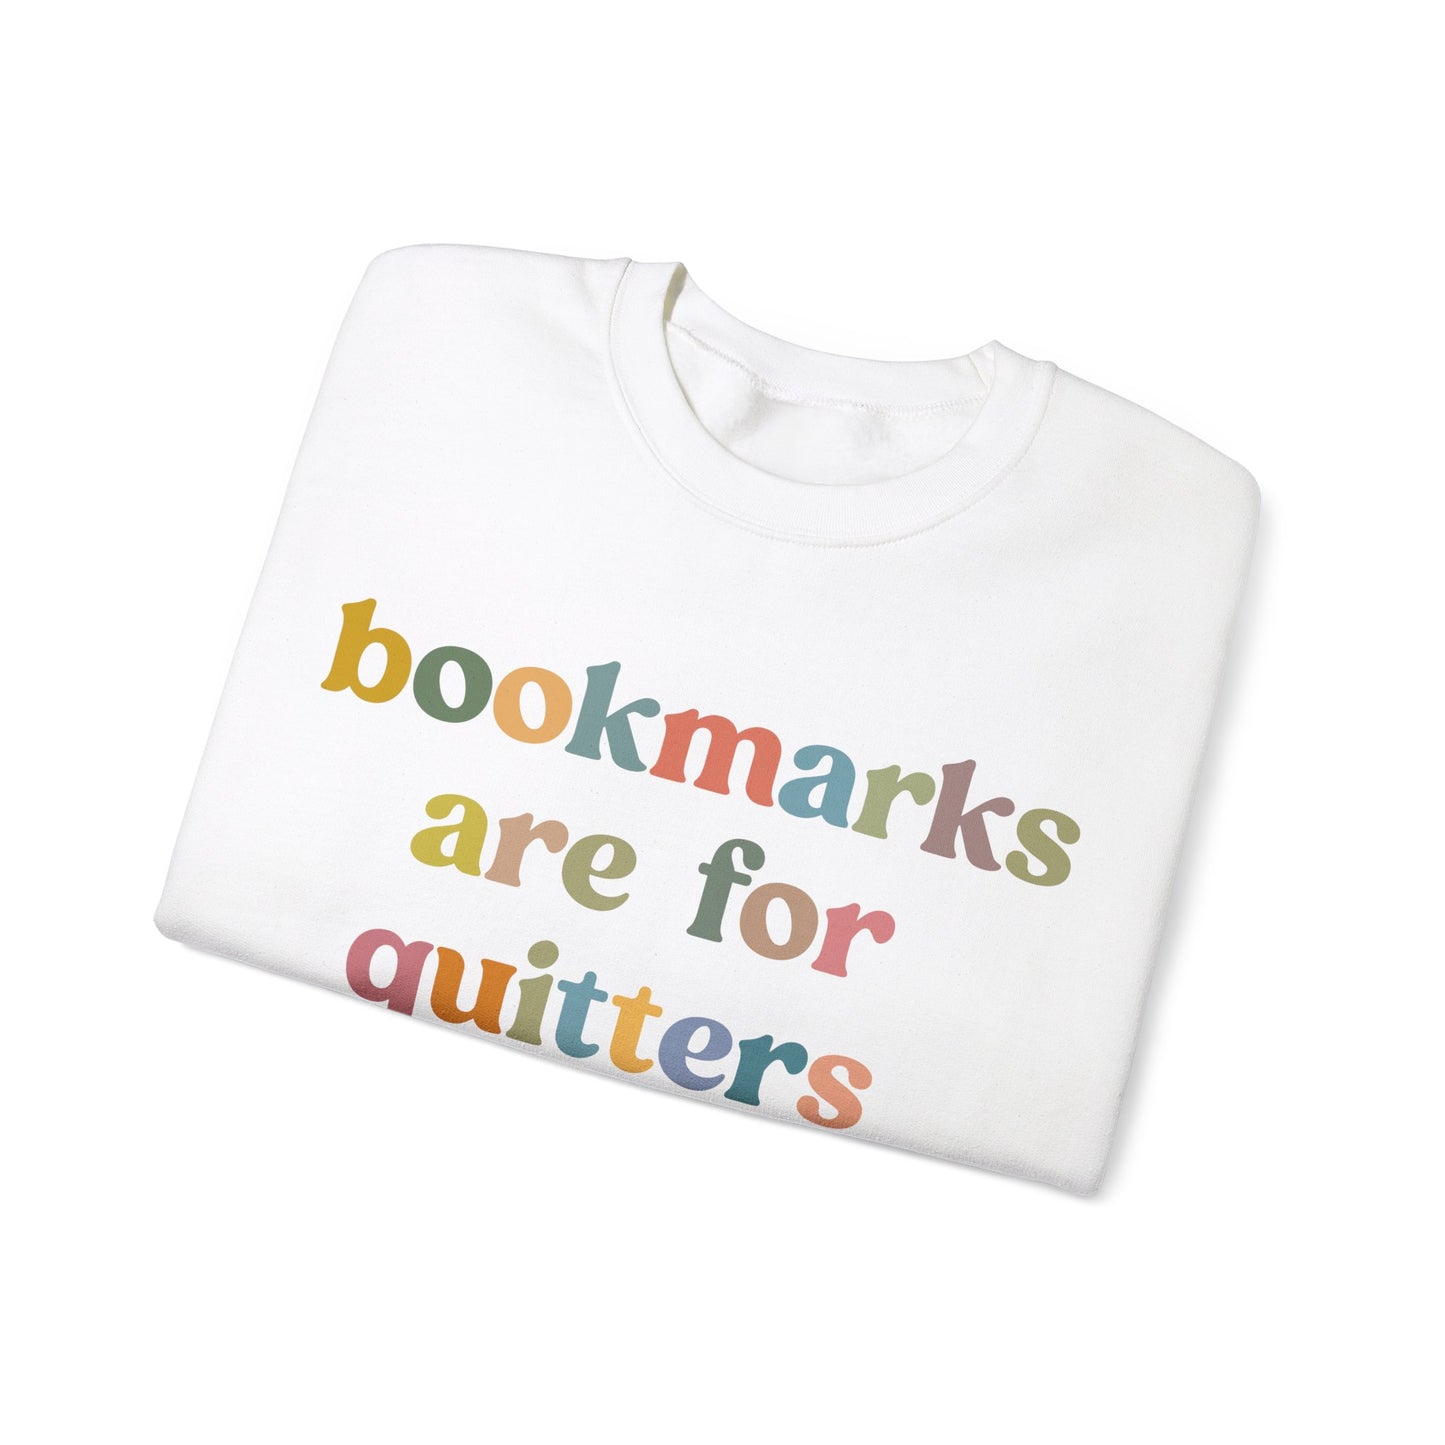 Bookmarks Are For Quitters Sweatshirt for Bookworm, Funny Librarian Crewneck for Book Lover, Crewneck for Book Nerd Gift, S1103